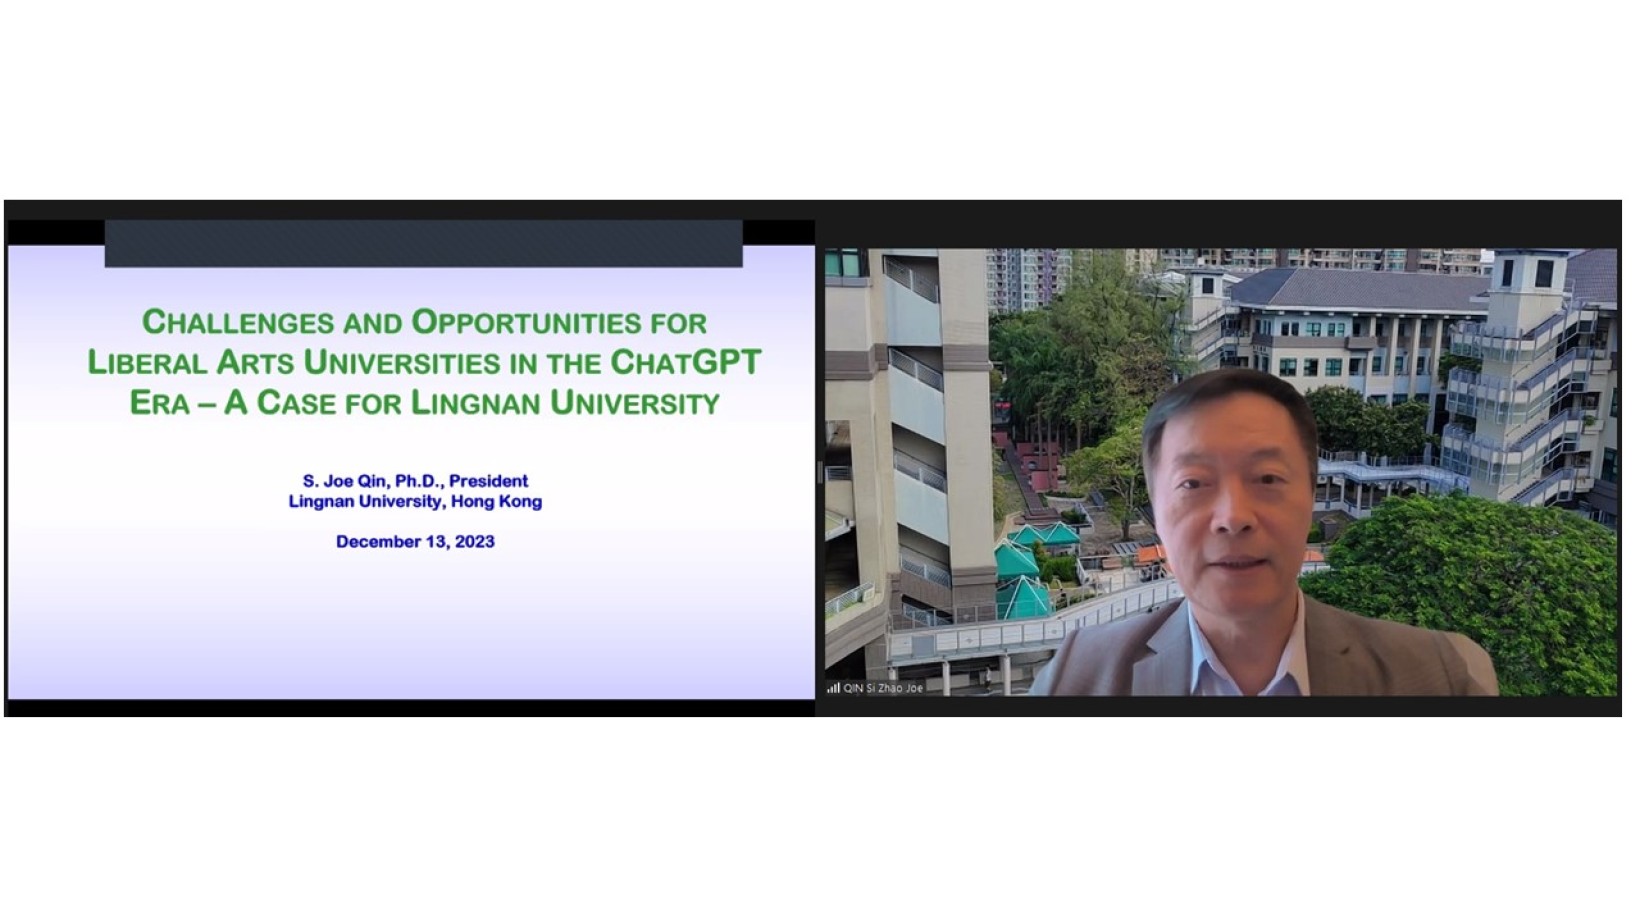 Prof S. Joe Qin, President of Lingnan University and Wai Kee Kau Chair Professor of Data Science, delivers his keynote speech at the China and Higher Education Conference 2023, titled ‘Challenges and Opportunities for Liberal Arts Universities in the ChatGPT Era – A Case for Lingnan University’.